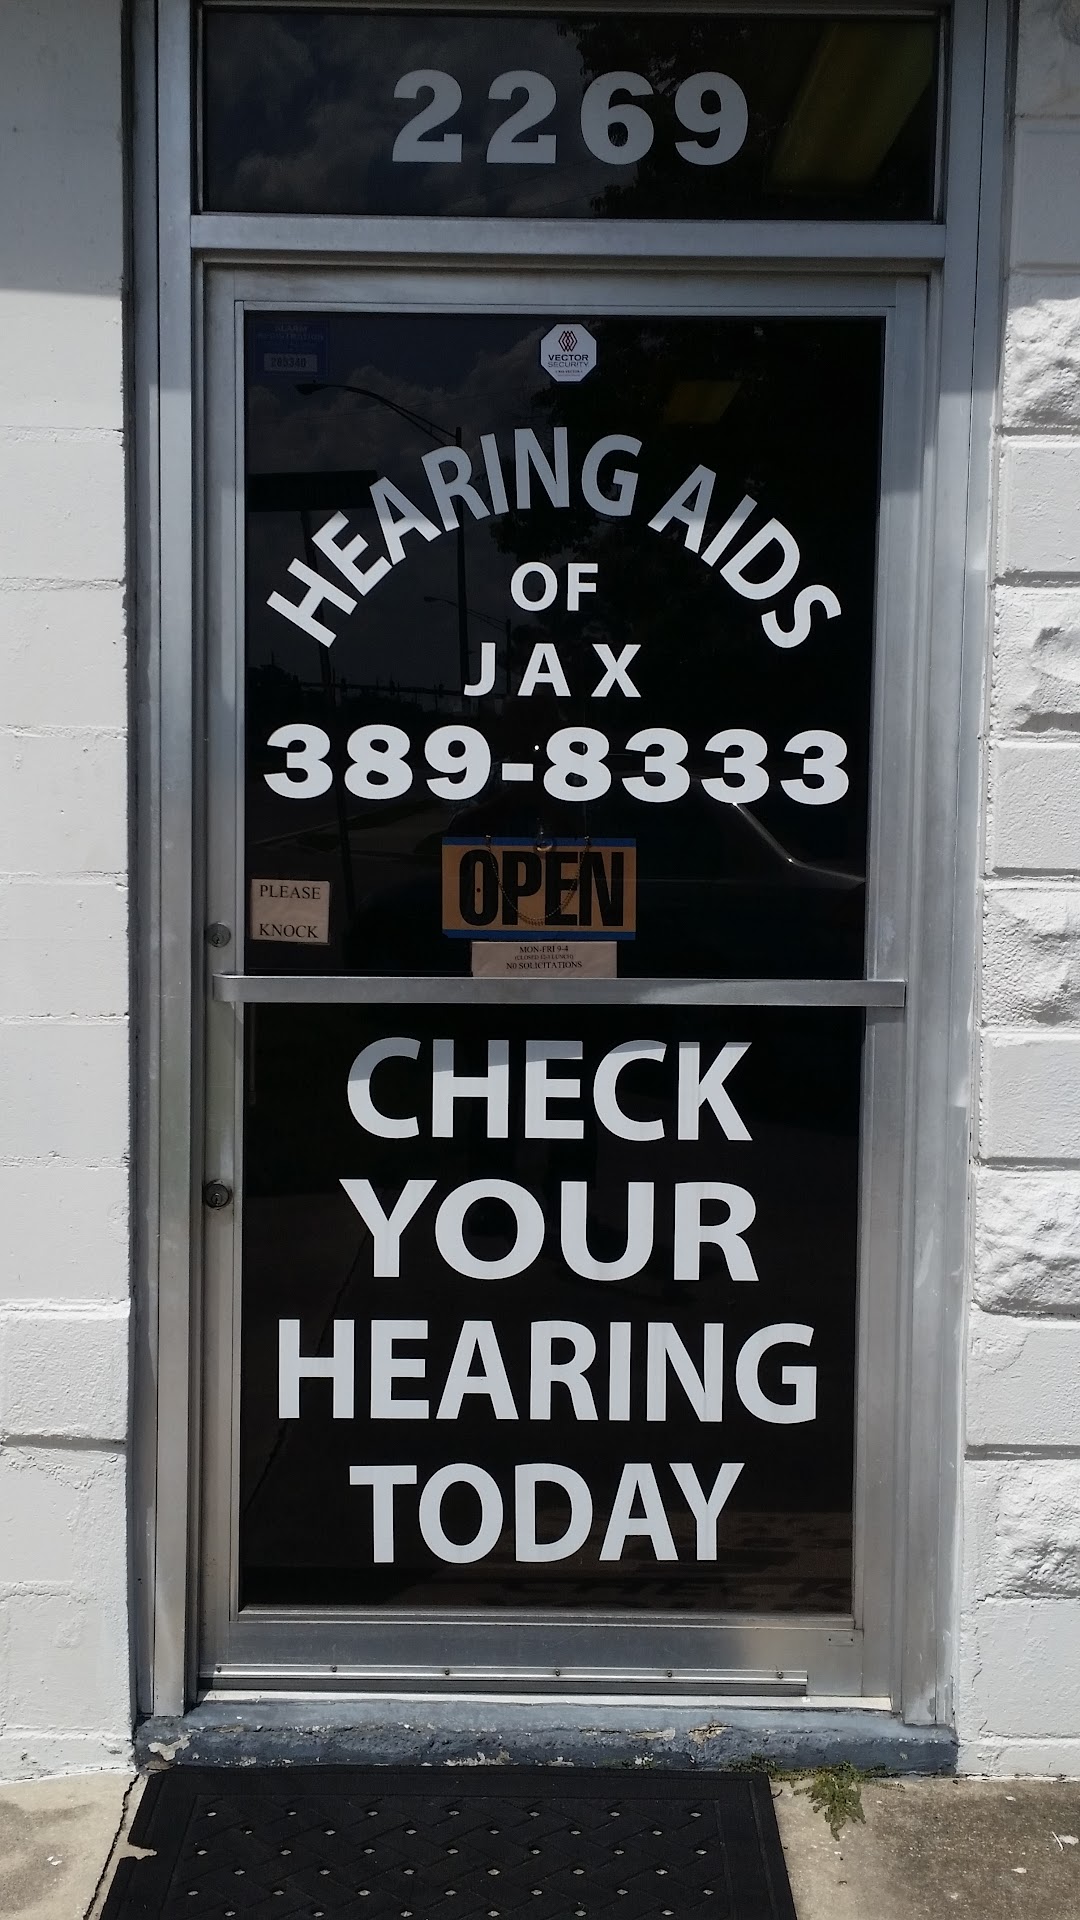 Hearing Aids of Jacksonville